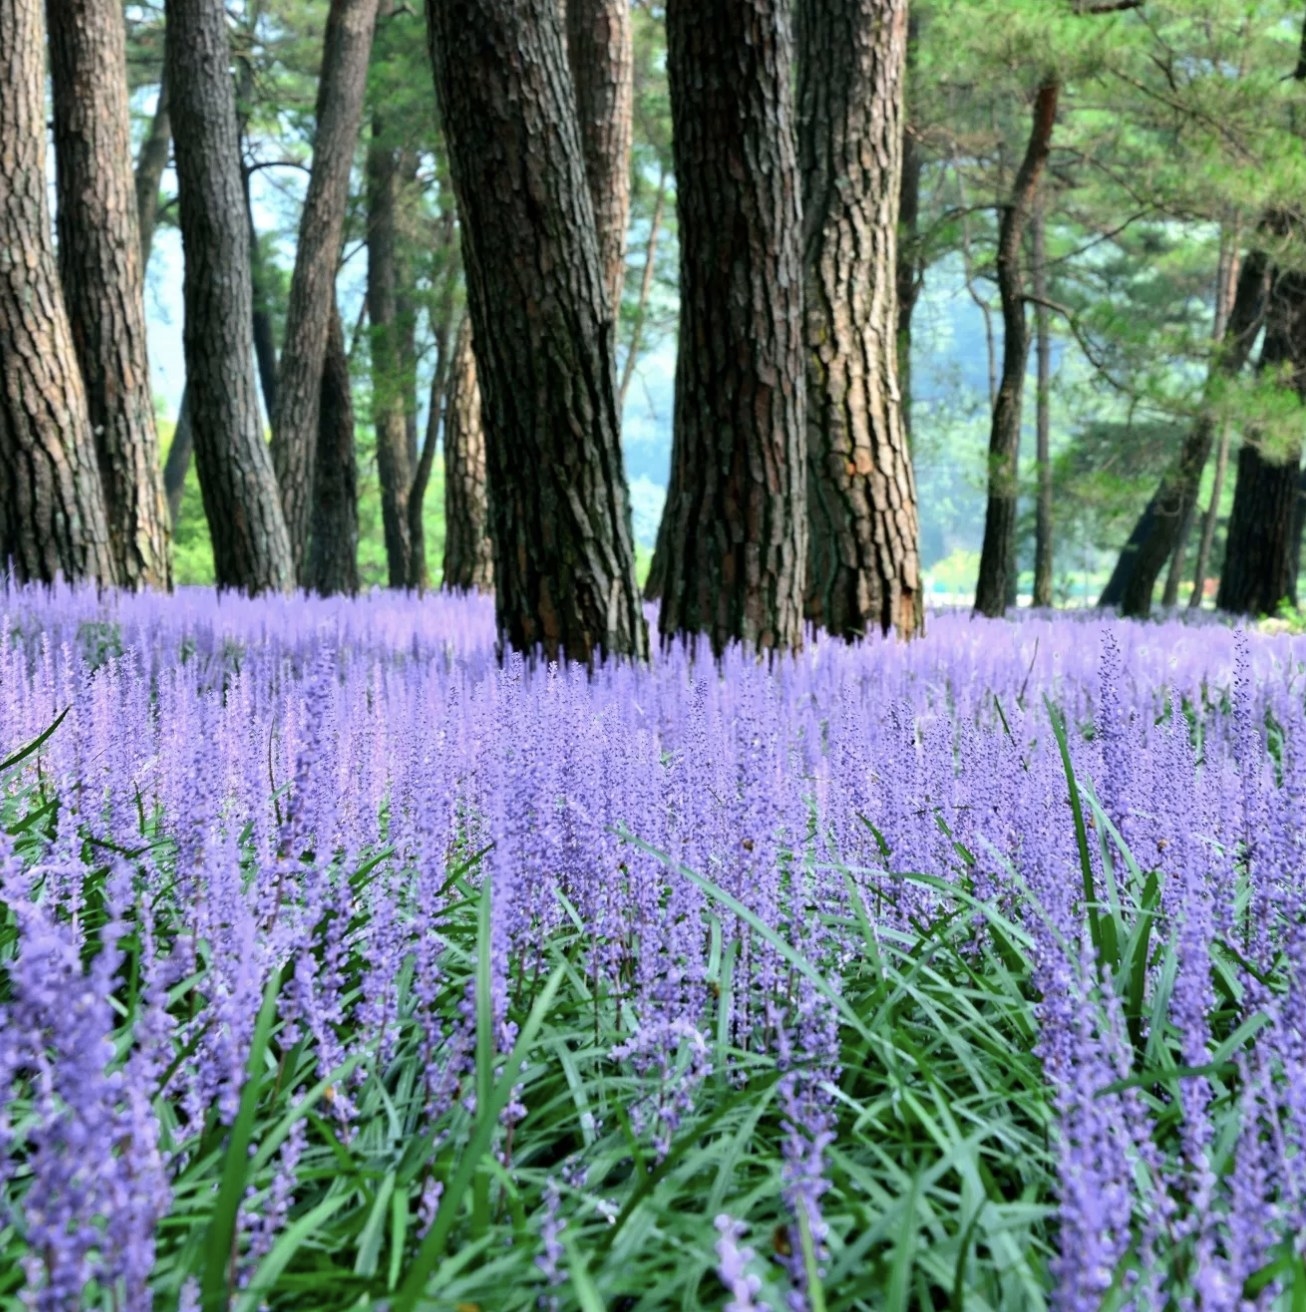 A field of trees and lilac flower spikes